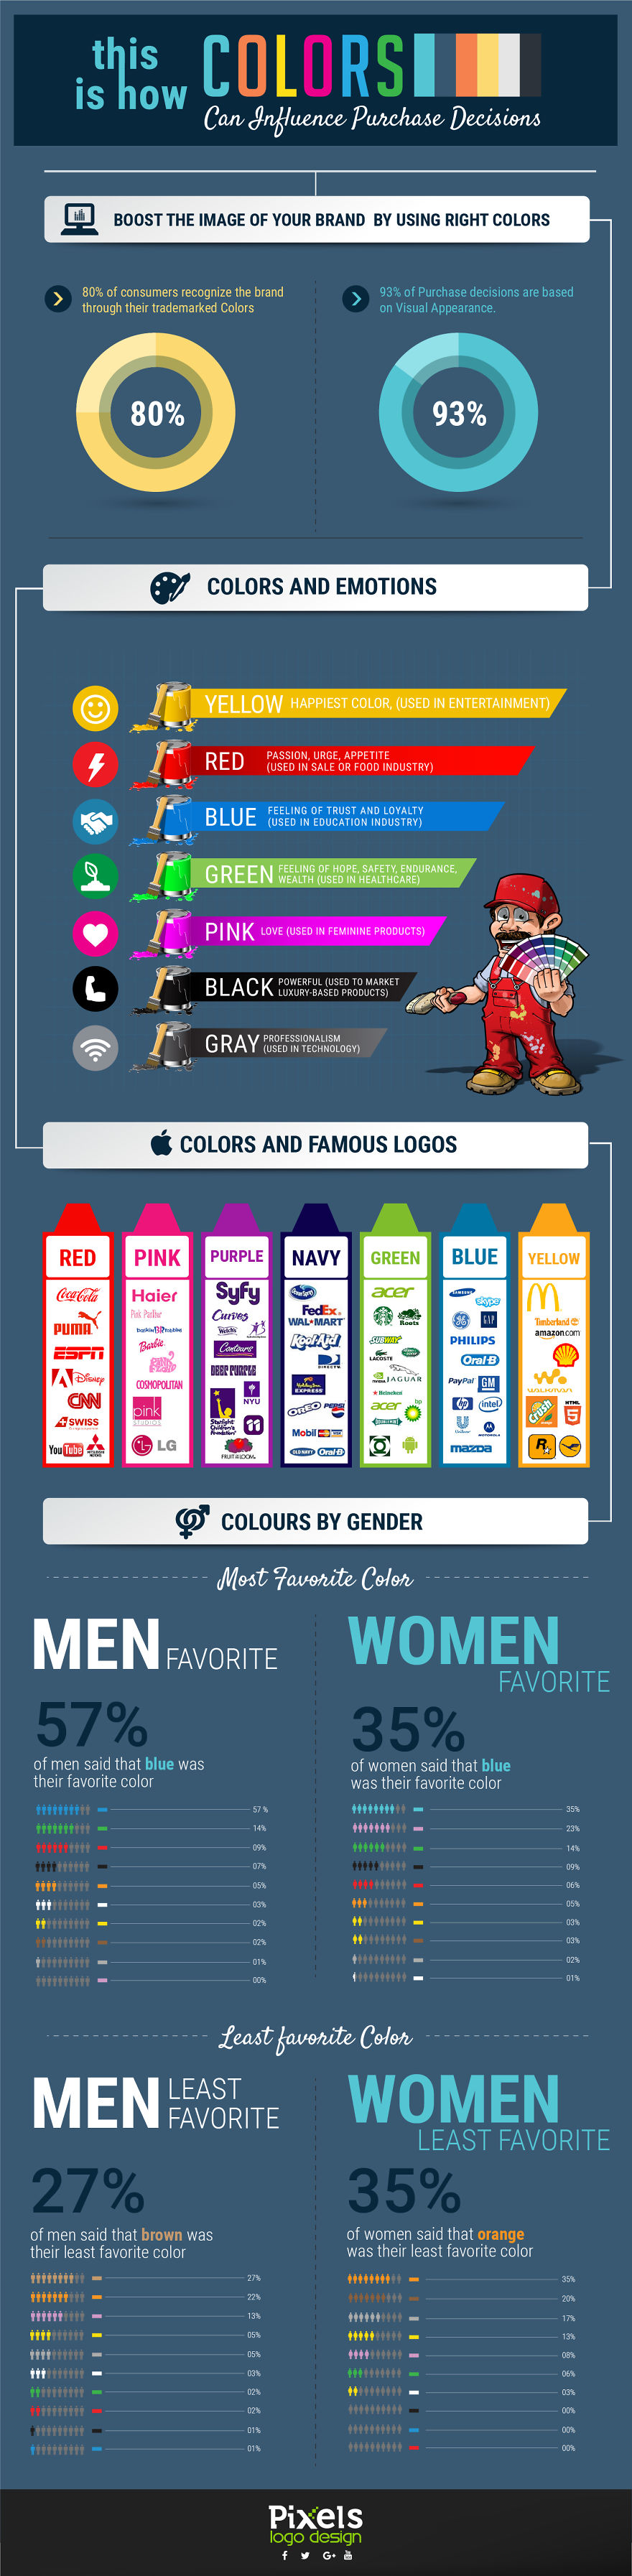 Colors And Emotions: Psychology Of Colors